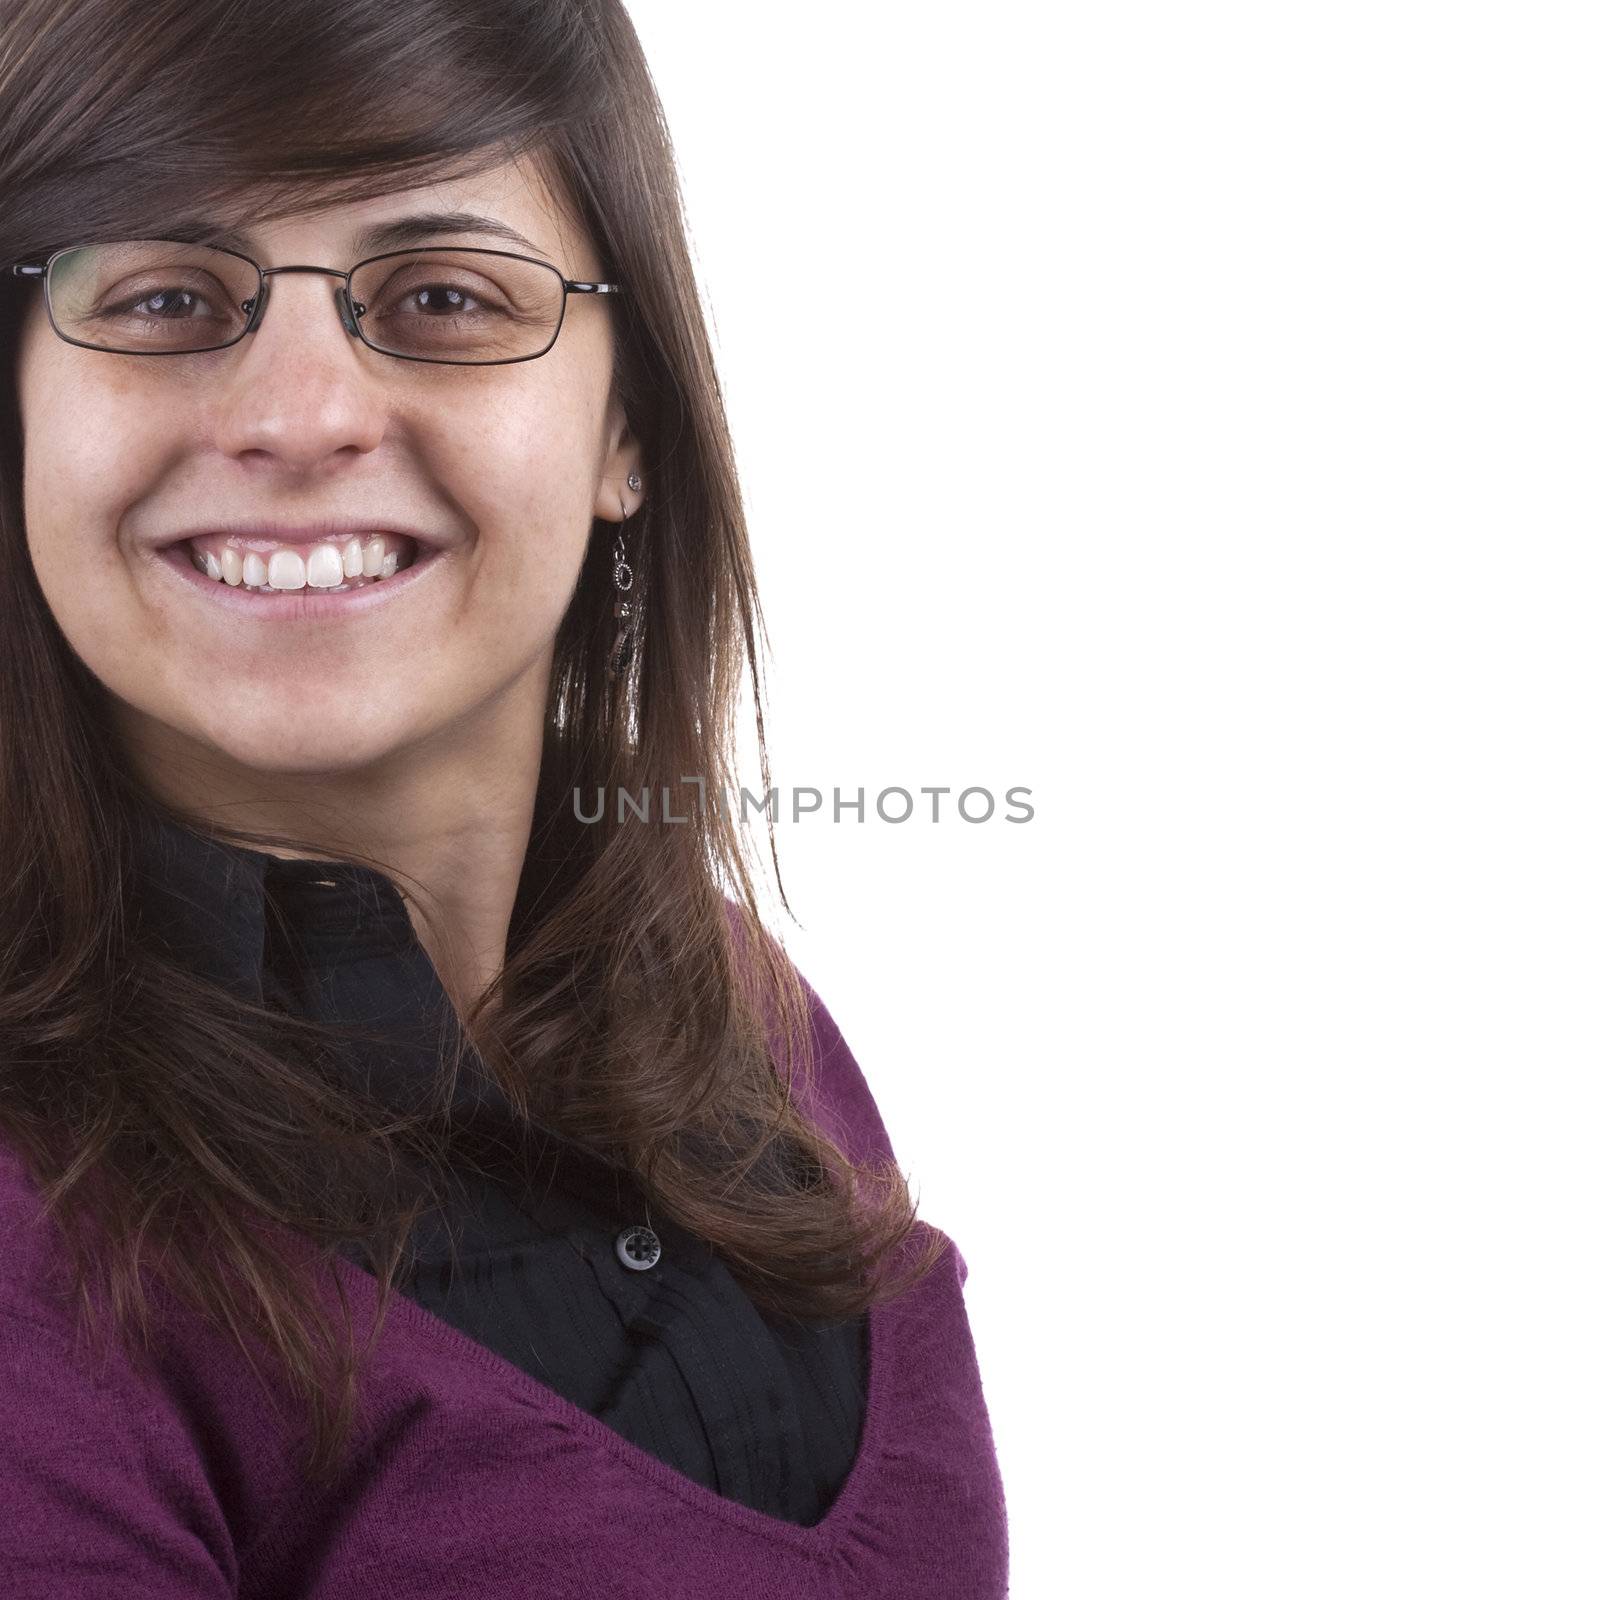 young beautiful businesswoman with glasses isolated on white background